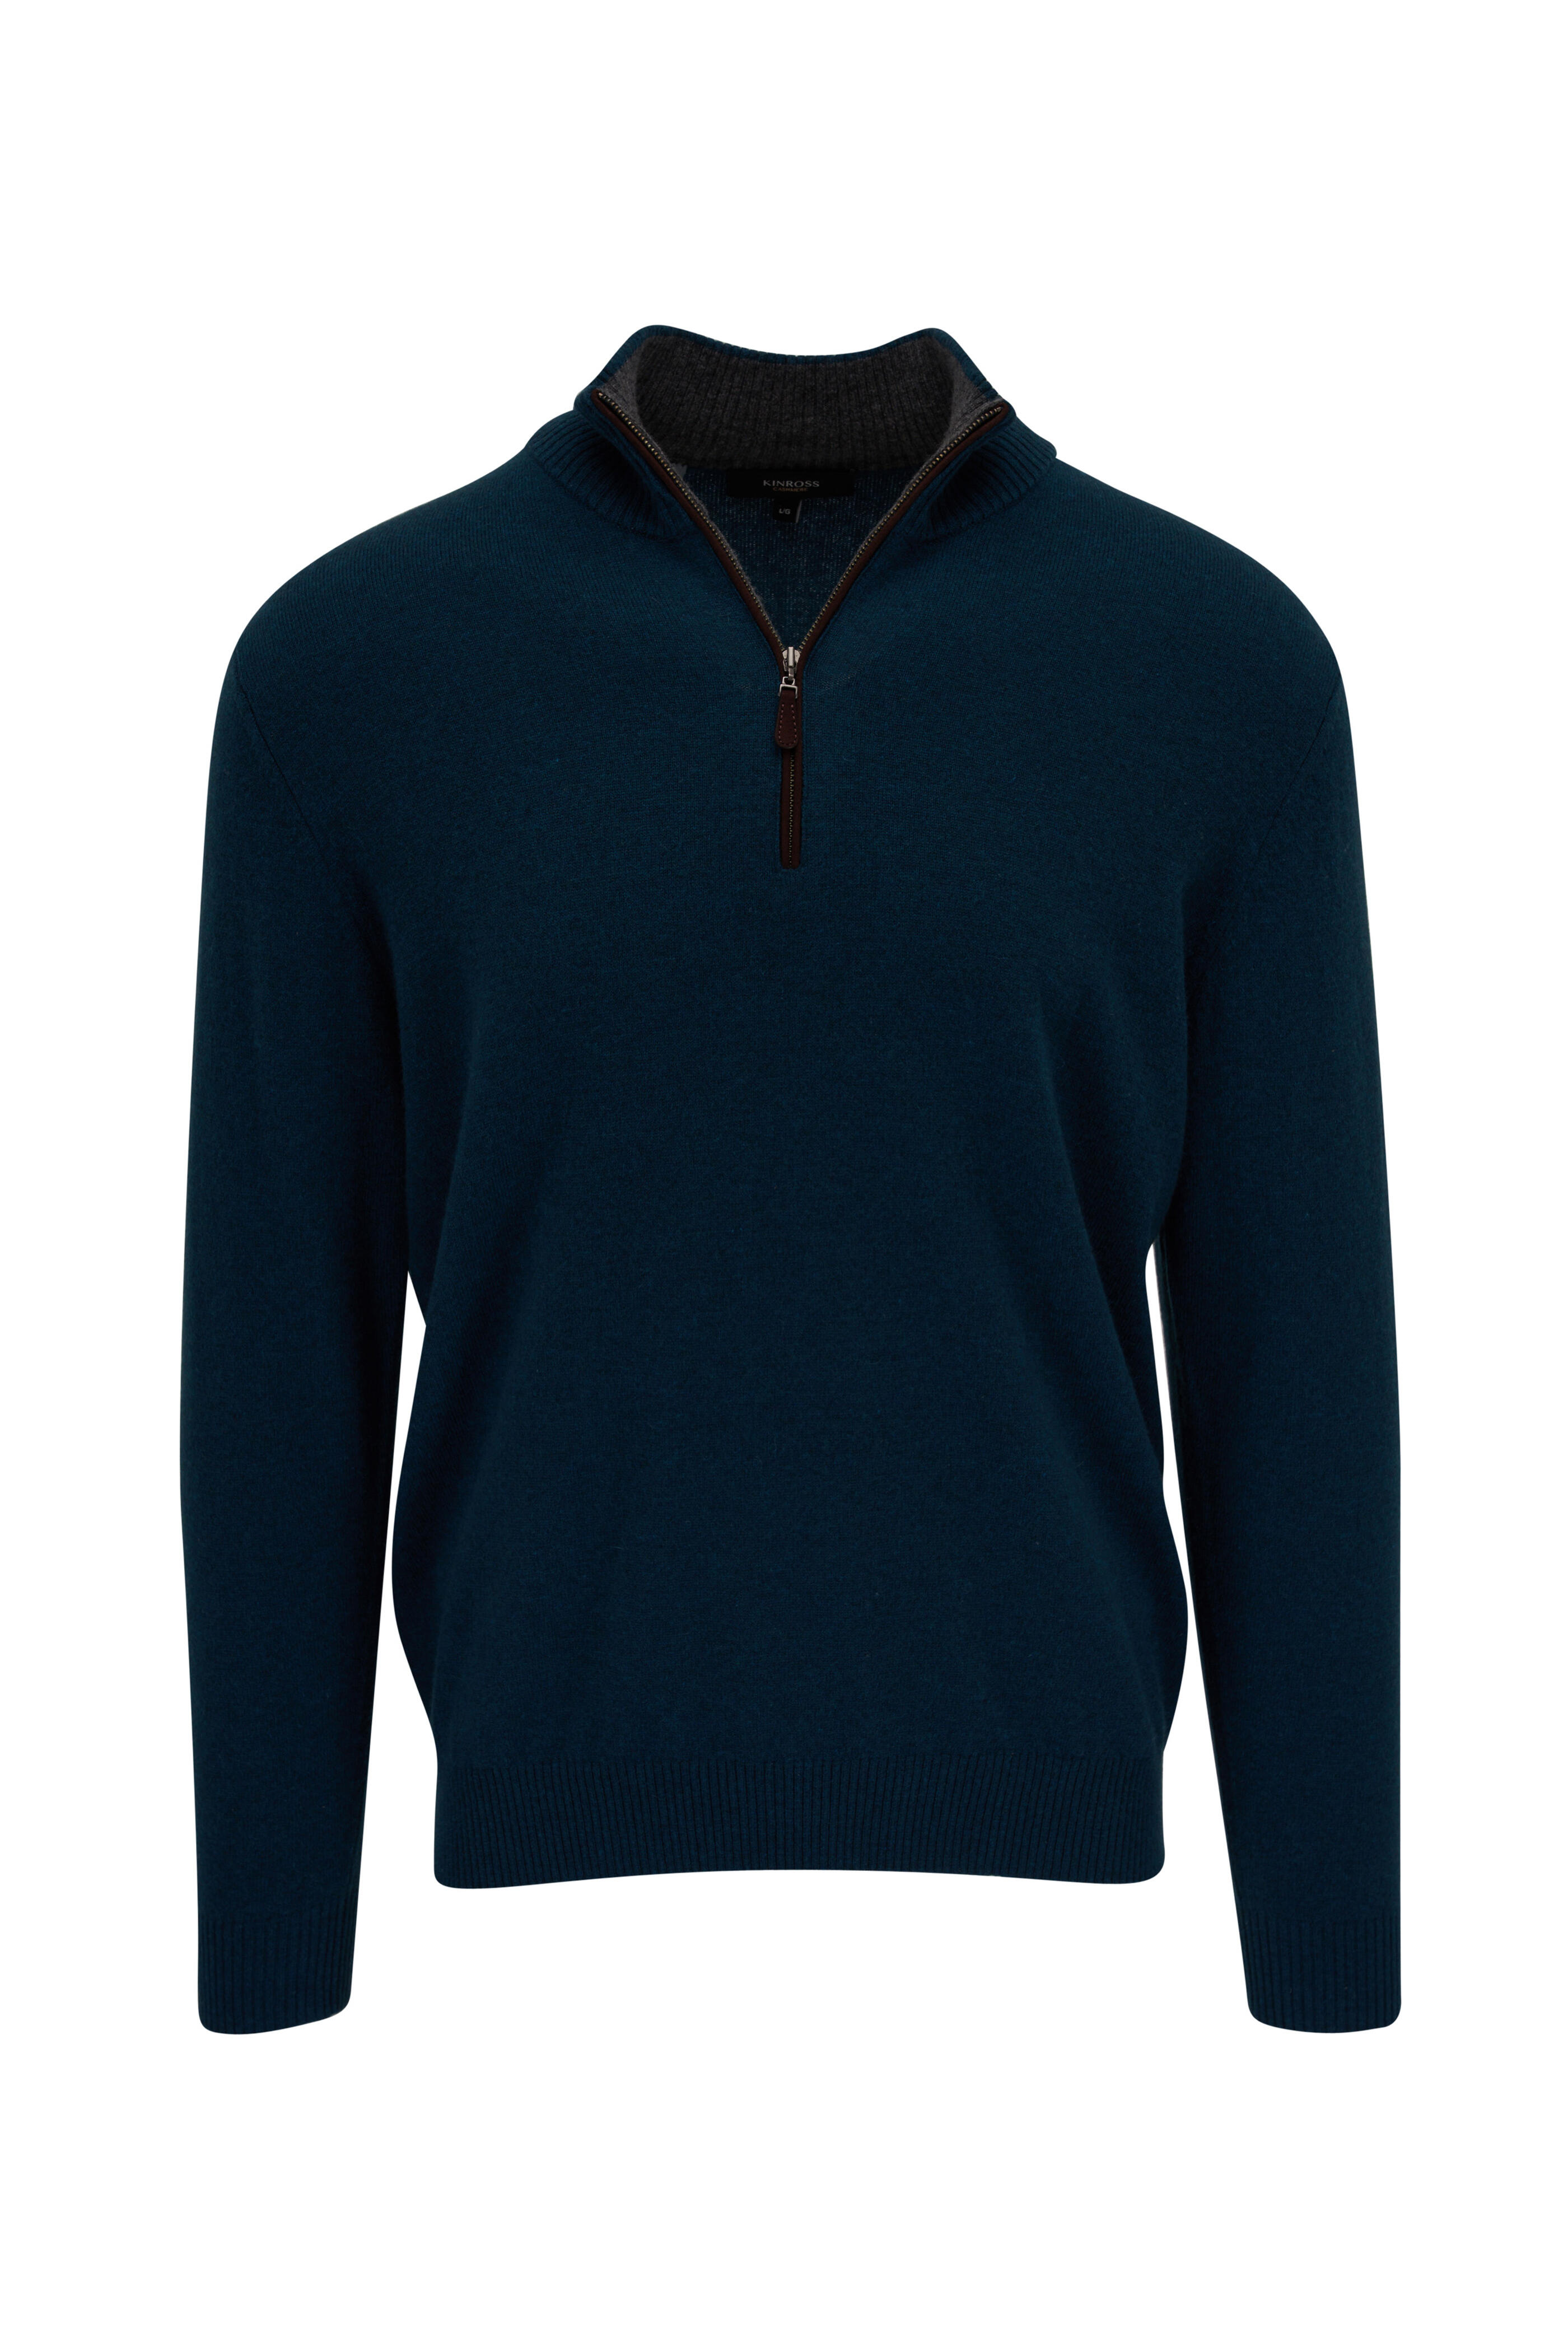 Kinross - Teal Suede Trim Quarter Zip Pullover | Mitchell Stores